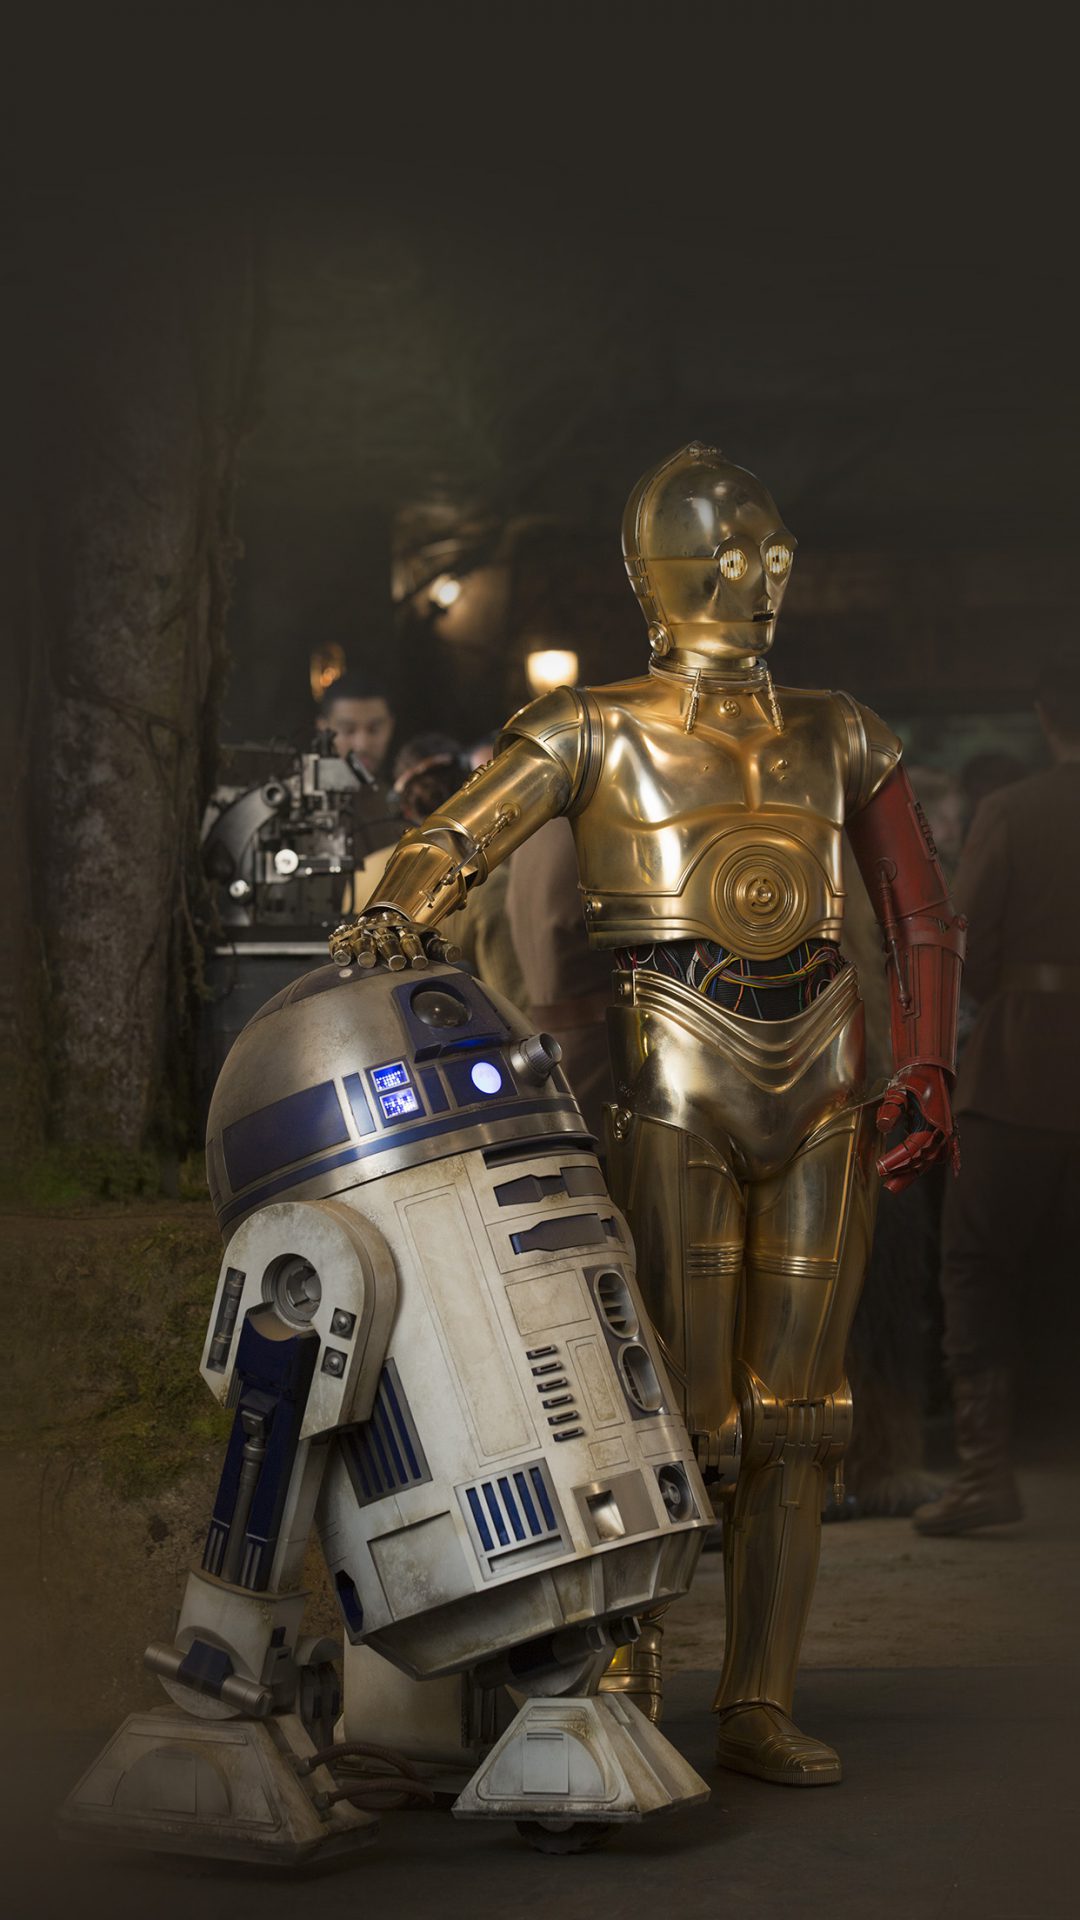 Star Wars: The Force AwakensR2-D2 and C-3PO (Anthony Daniels)Ph: David James©Lucasfilm 2015